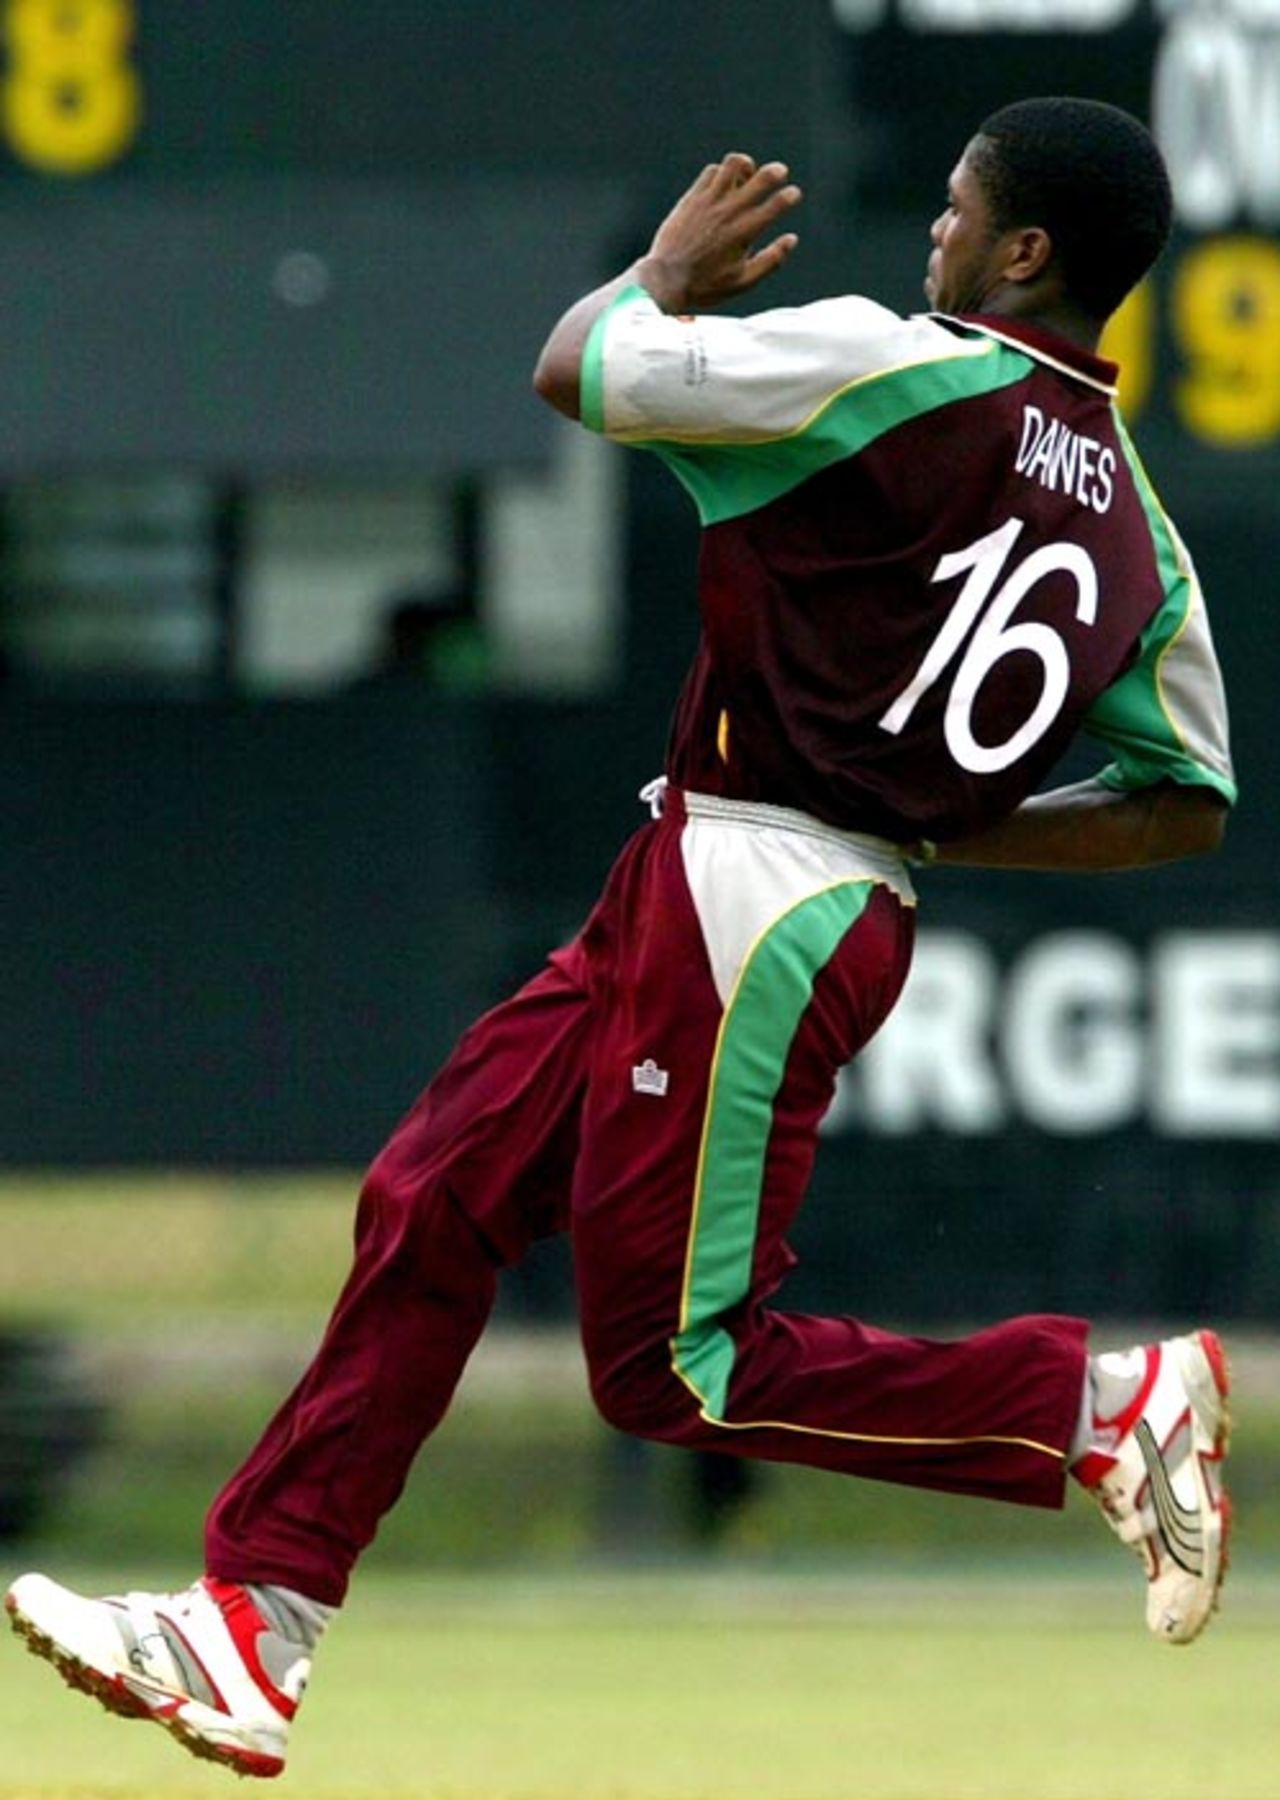 Jason Dawes runs in to bowl against Nepal, Nepal v West Indies, plate final, Under-19 World Cup, Kuala Lumpur, March 1, 2008 